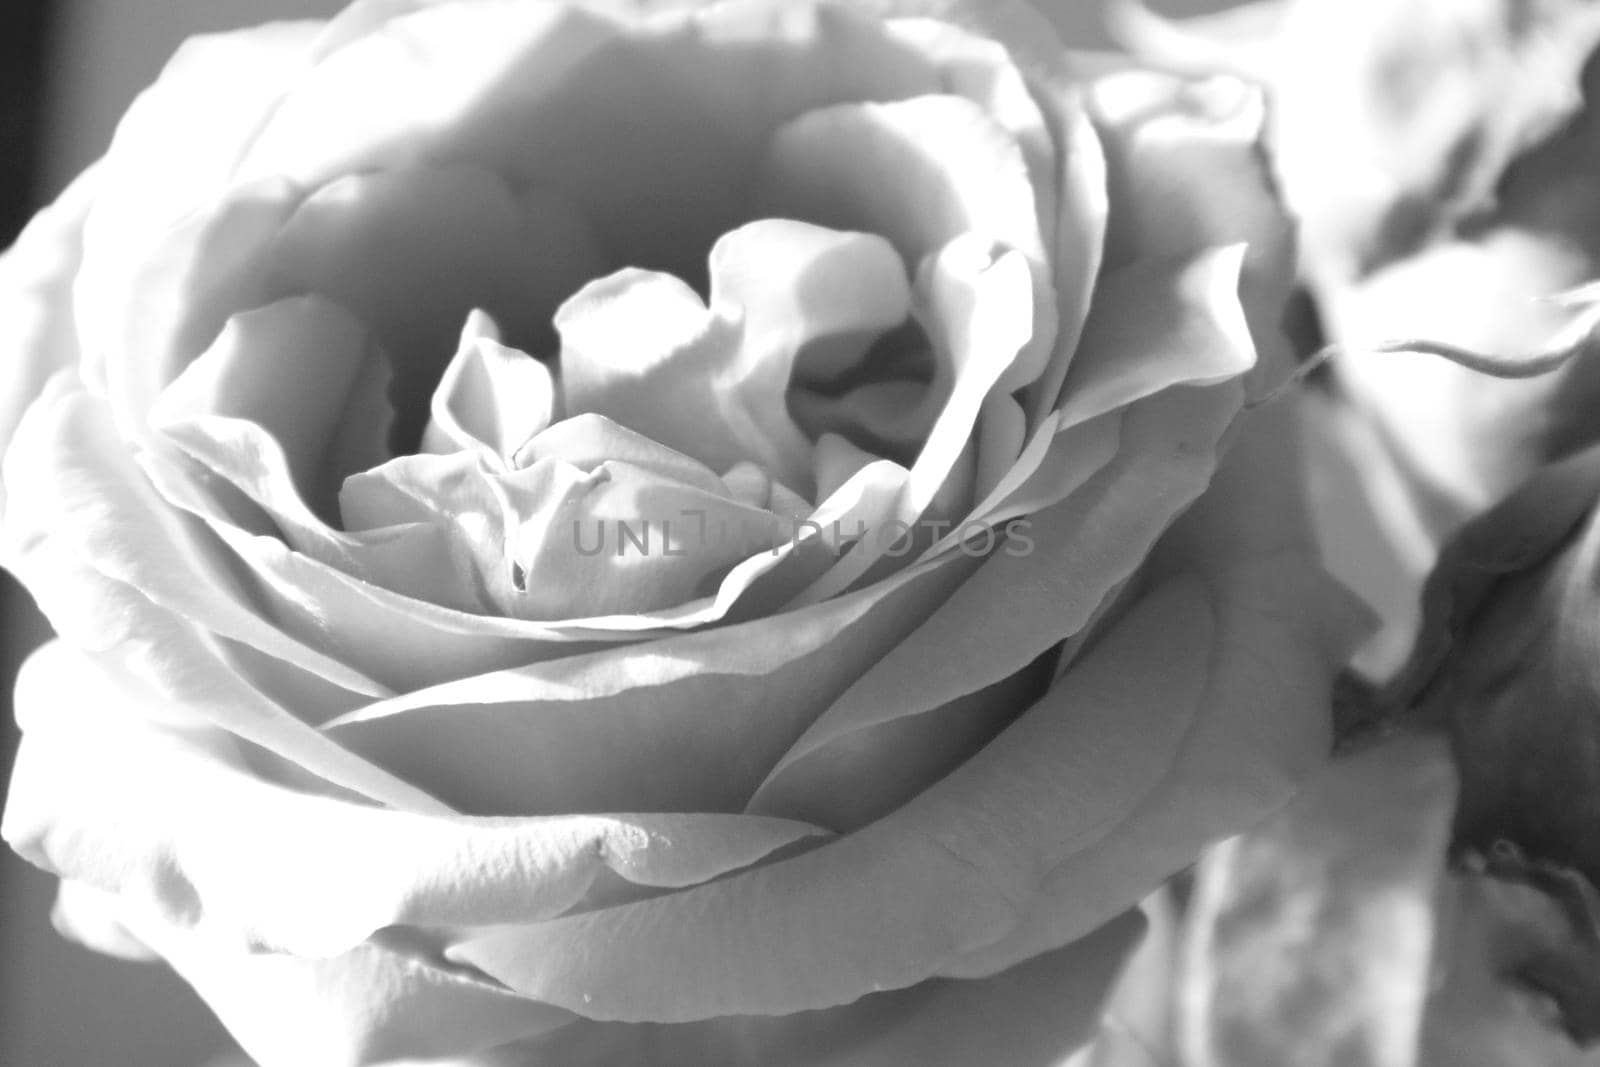 Close-up of a single rose flower, black and white photography, monochrome, minimalism.